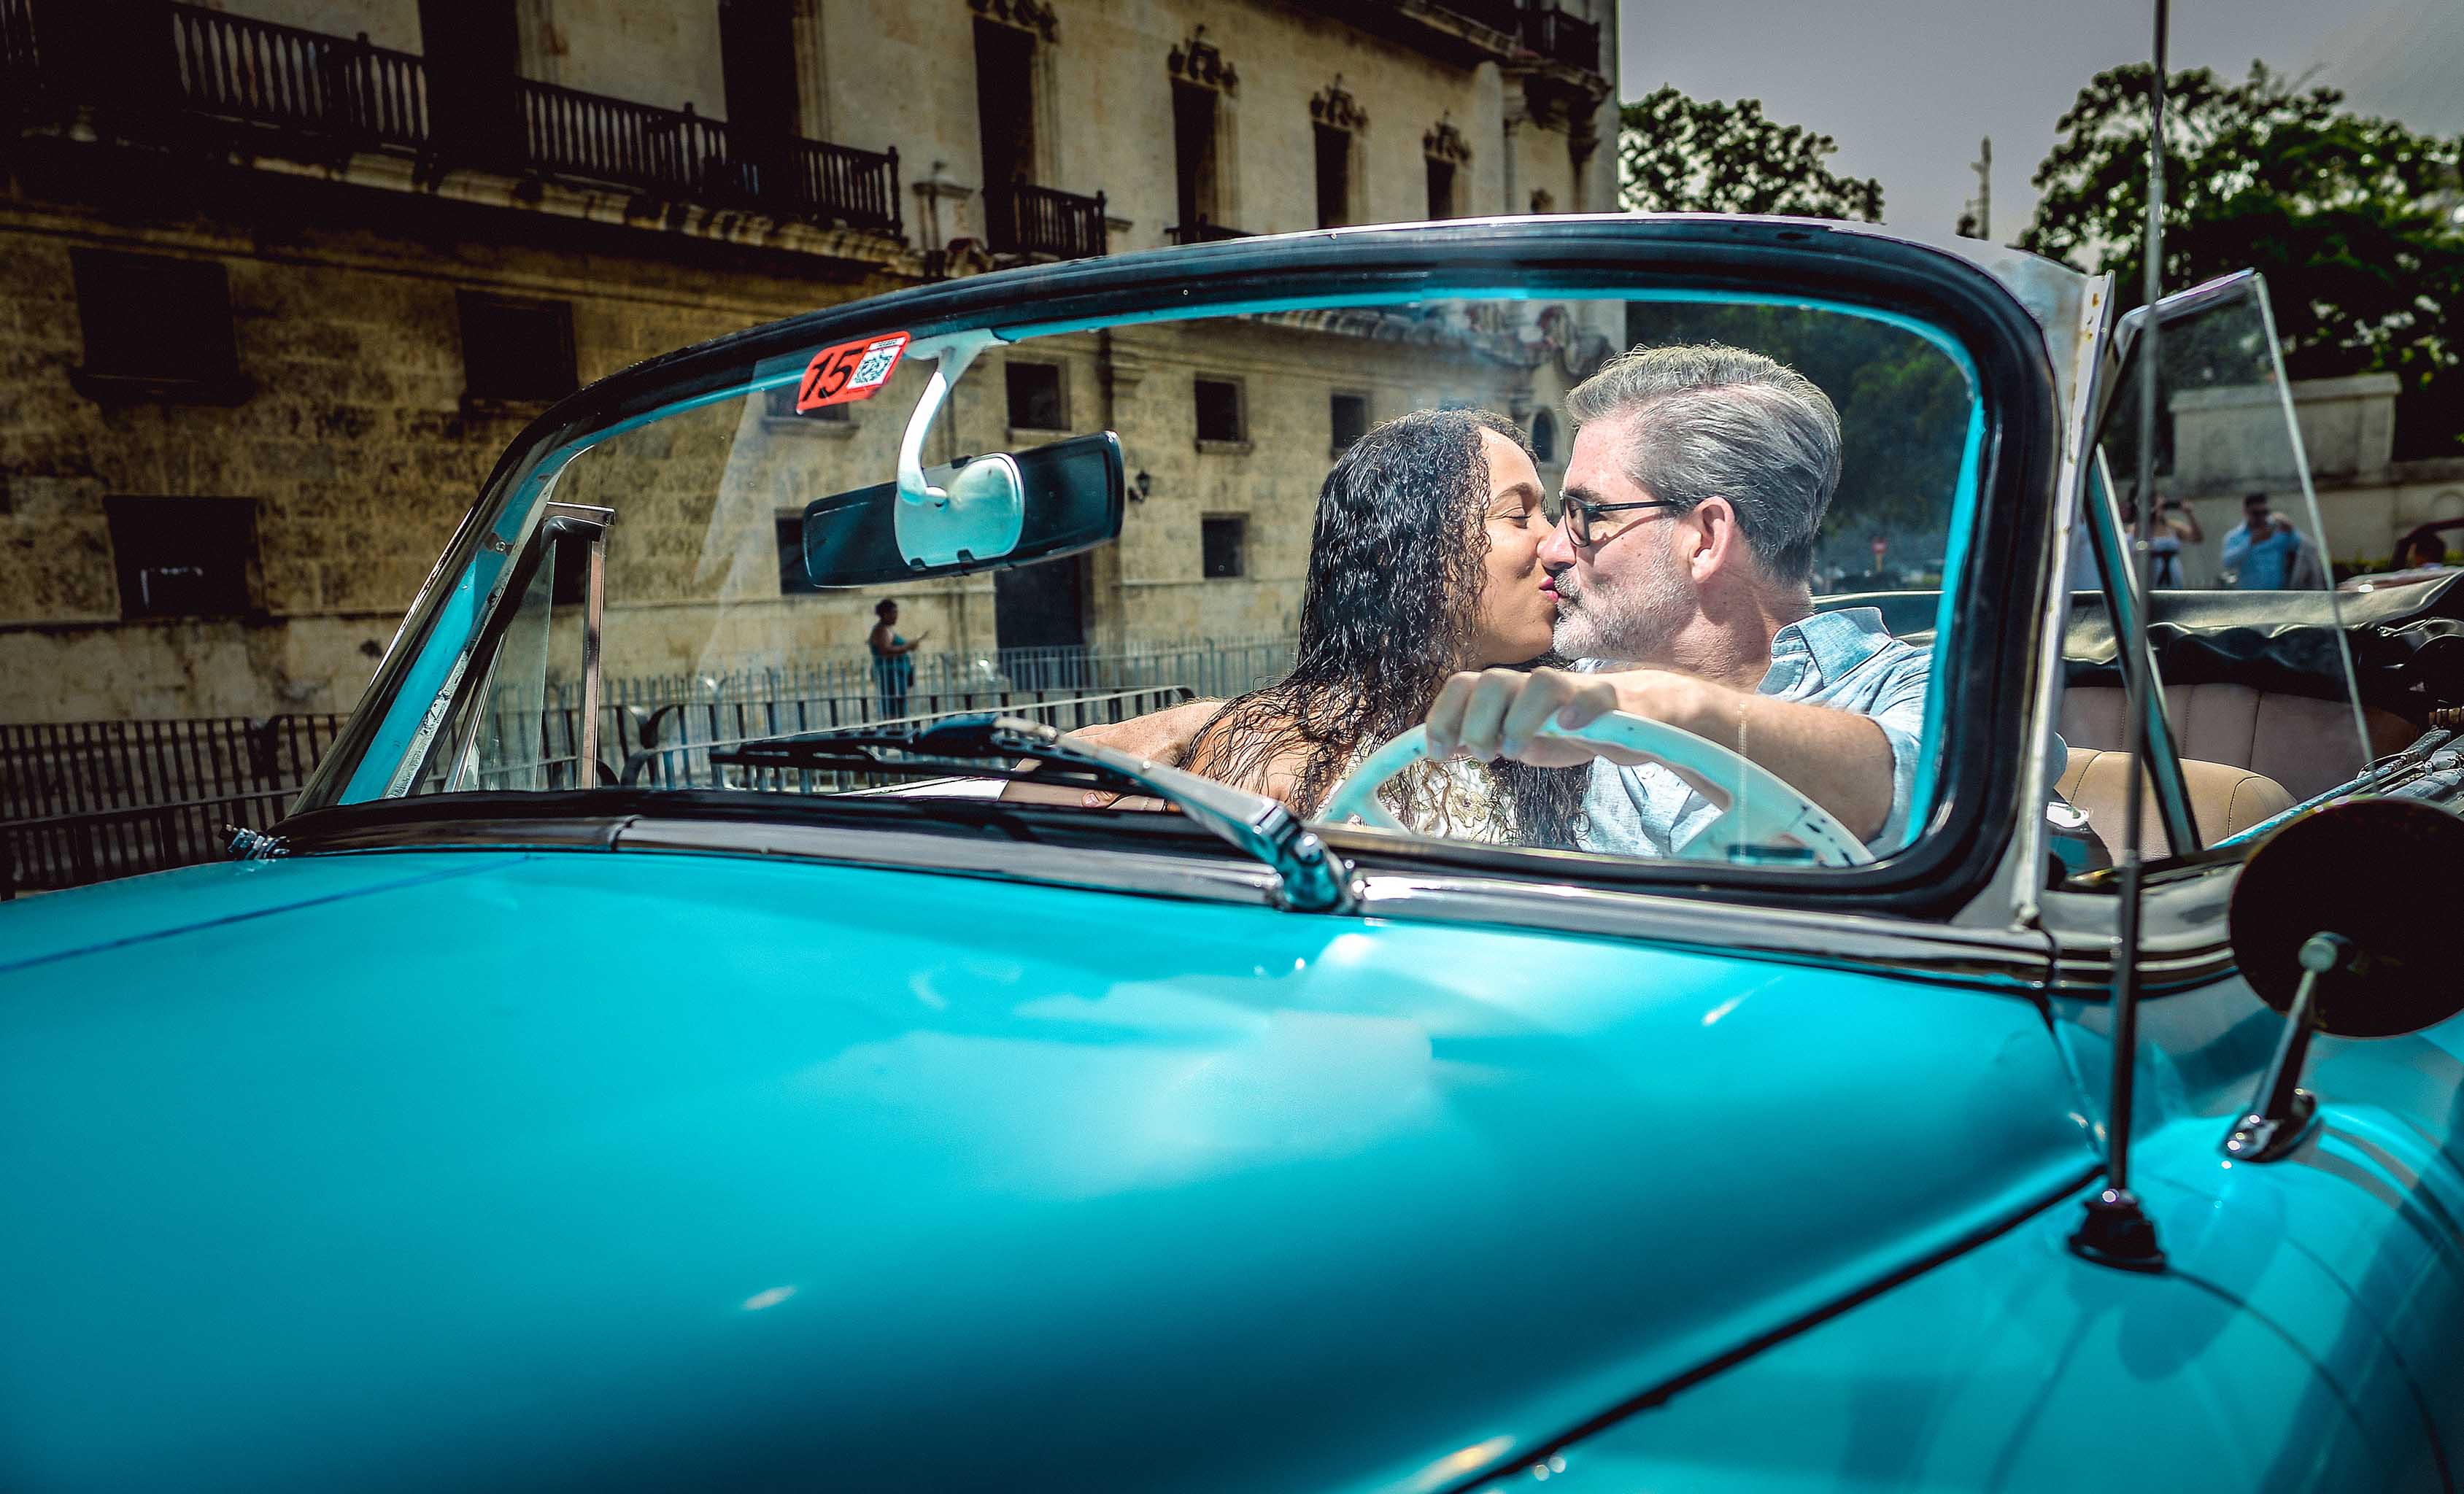 This article explains why classic car photos are a must-have for your vacation album in Havana, Cuba. Classic cars, many of which date back to the 1950s, are an iconic part of Havana's landscape and offer a unique backdrop for your vacation photos. These cars are a testament to Havana's rich history and culture, provide a striking contrast against the city's colonial architecture and cobblestone streets, and make for great photo opportunities. Classic car tours are a popular way to see the city and offer a unique perspective on Havana's landmarks and attractions.